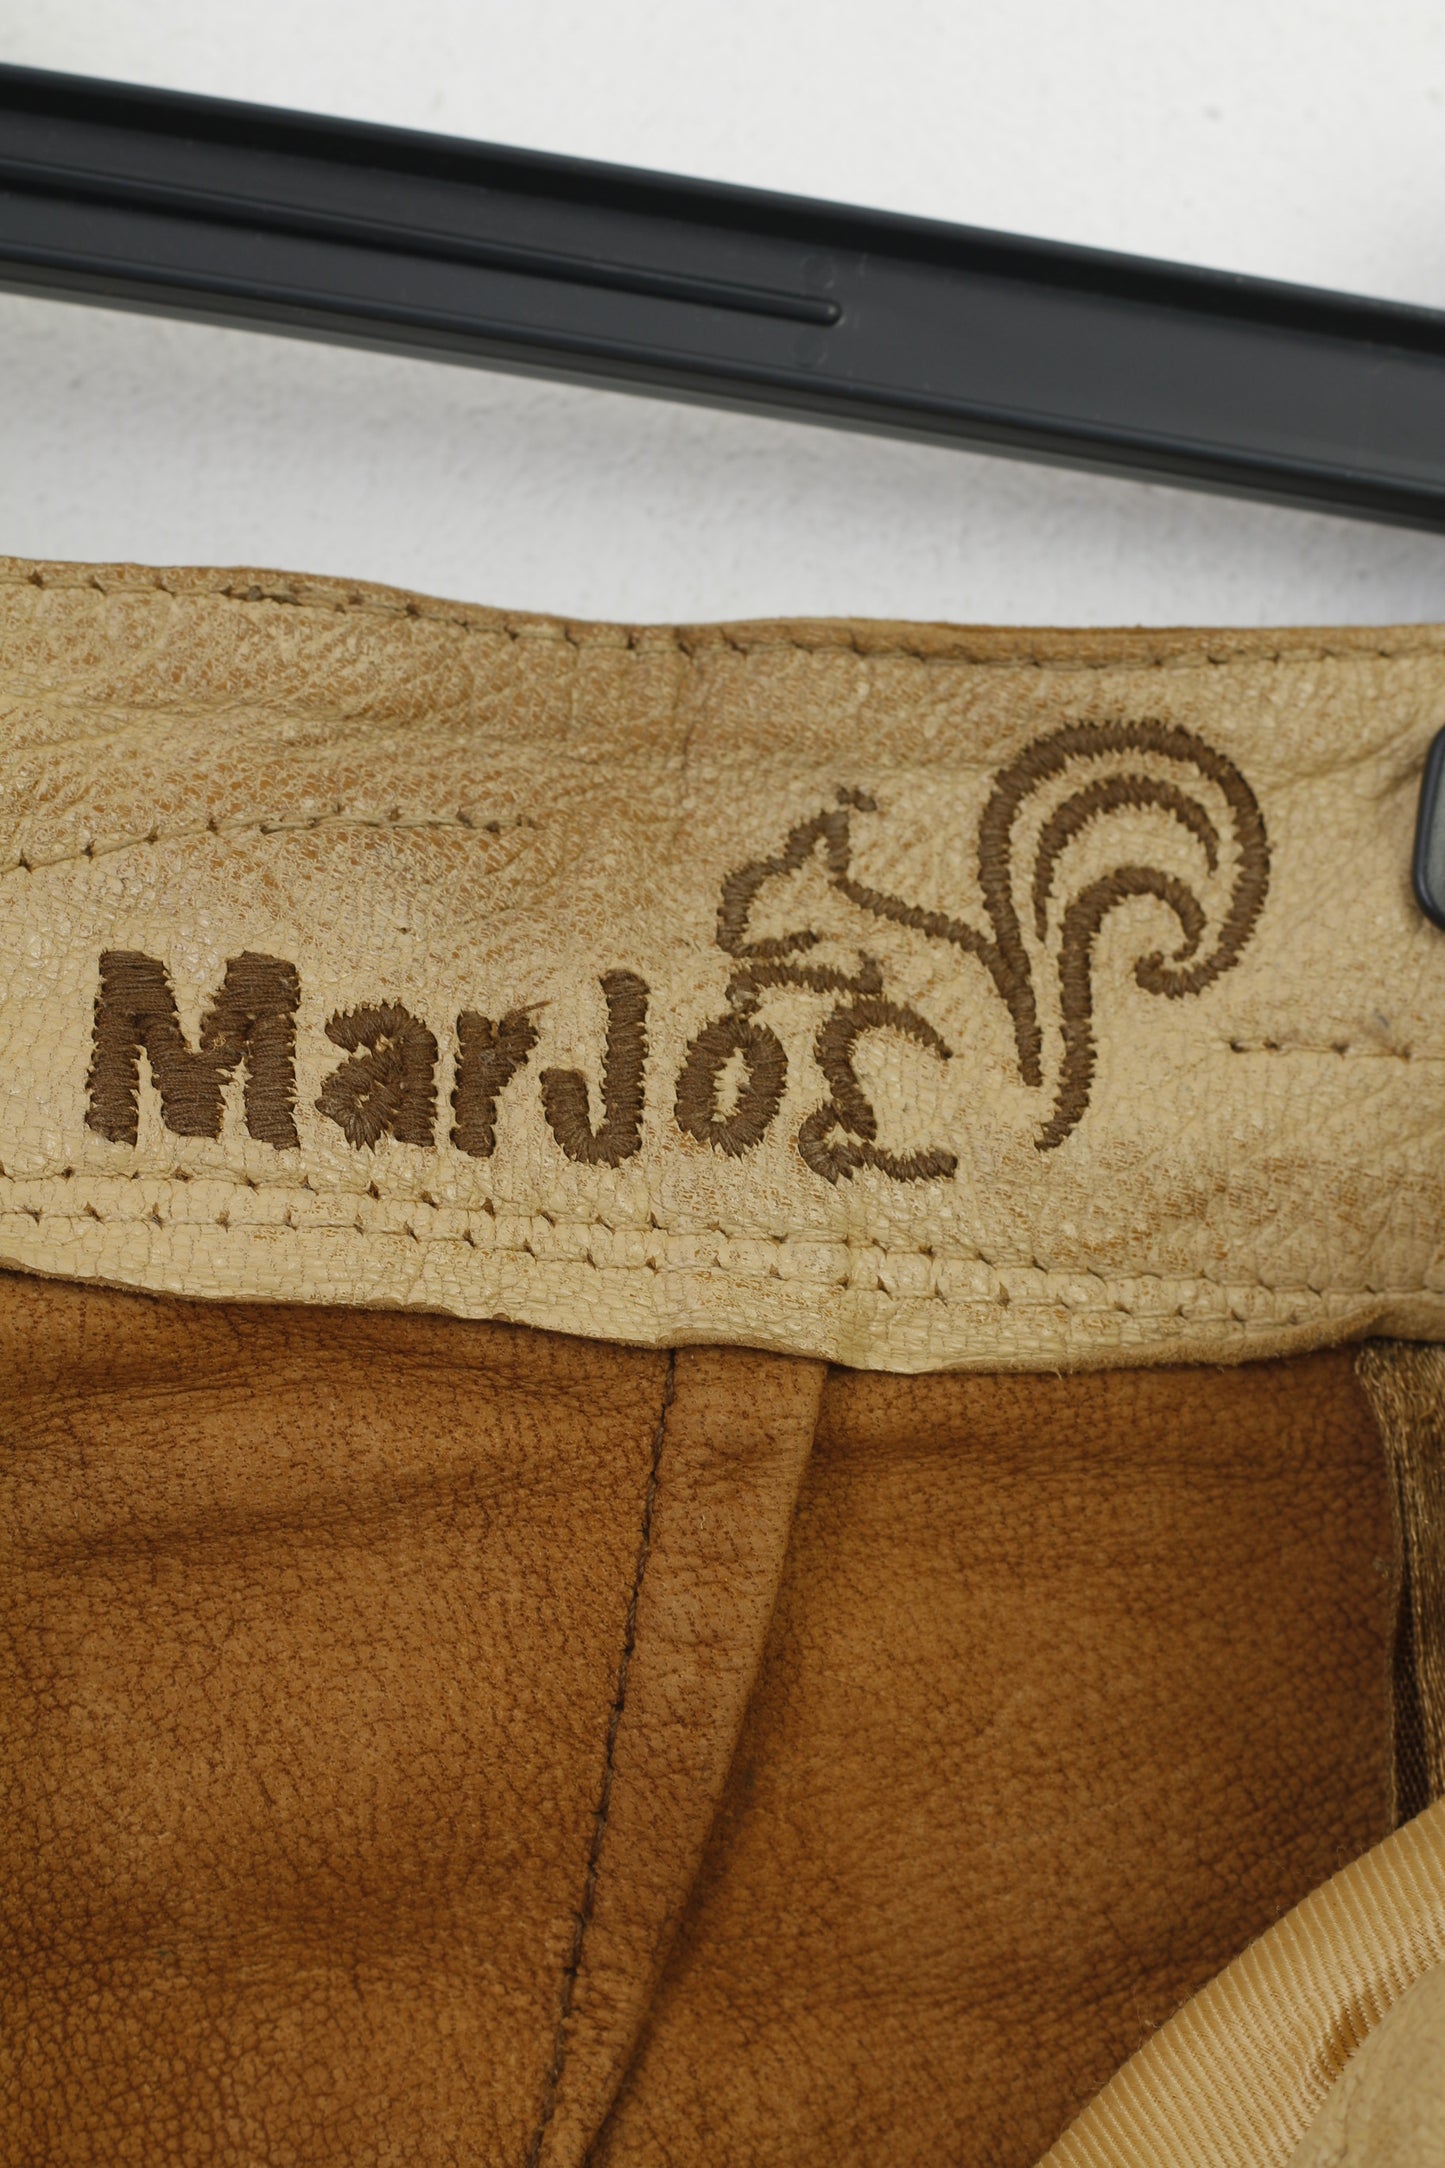 Marjo Men 50 Leather Trousers Brown Vintage Tyrol Austria Trachten Western Cowboy Traditional Emroidered Bottoms Pockets